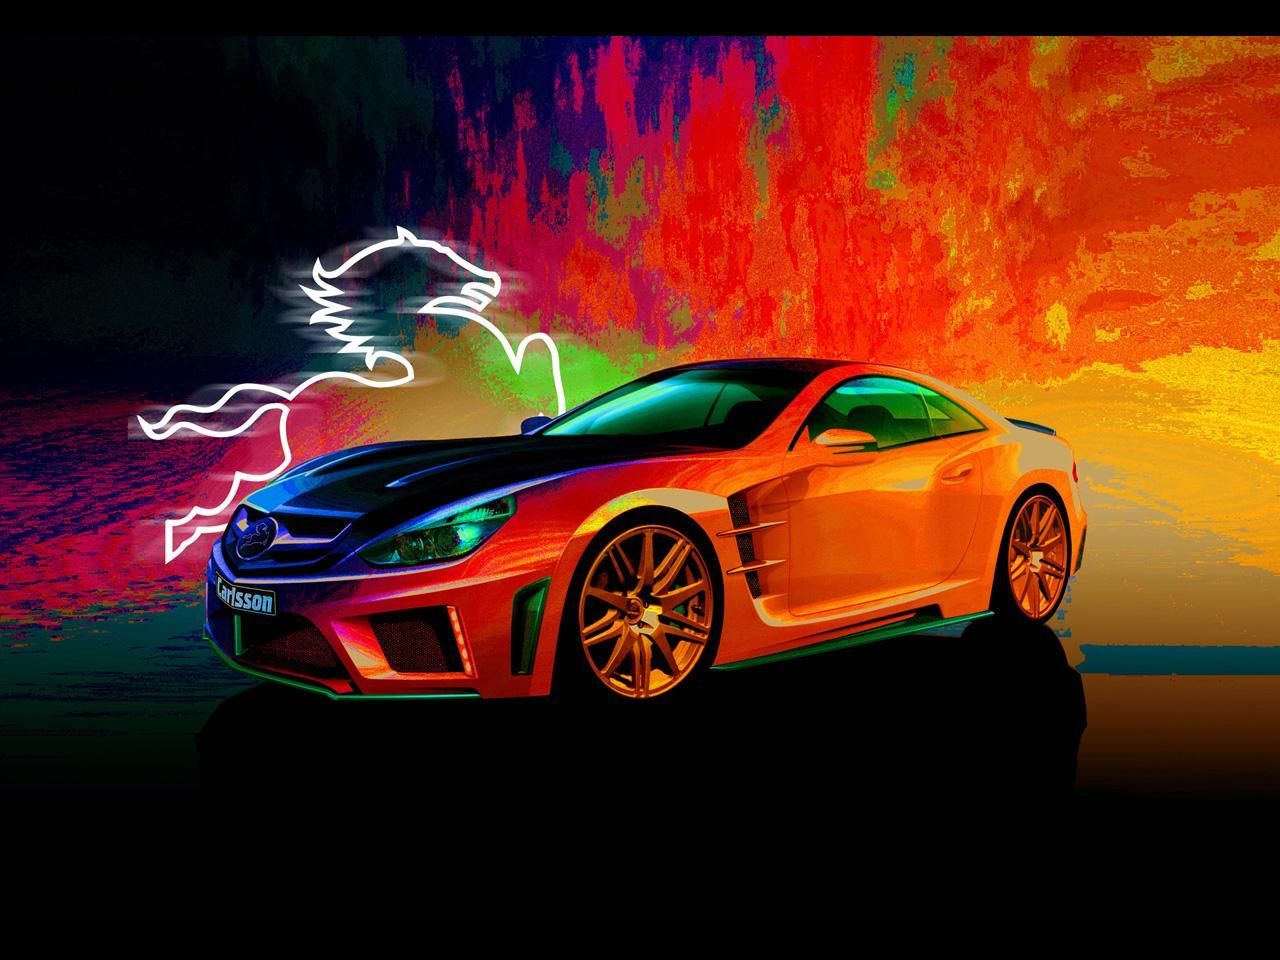 33 Strikingly Awesome Car Wallpapers to Revamp your Desktops